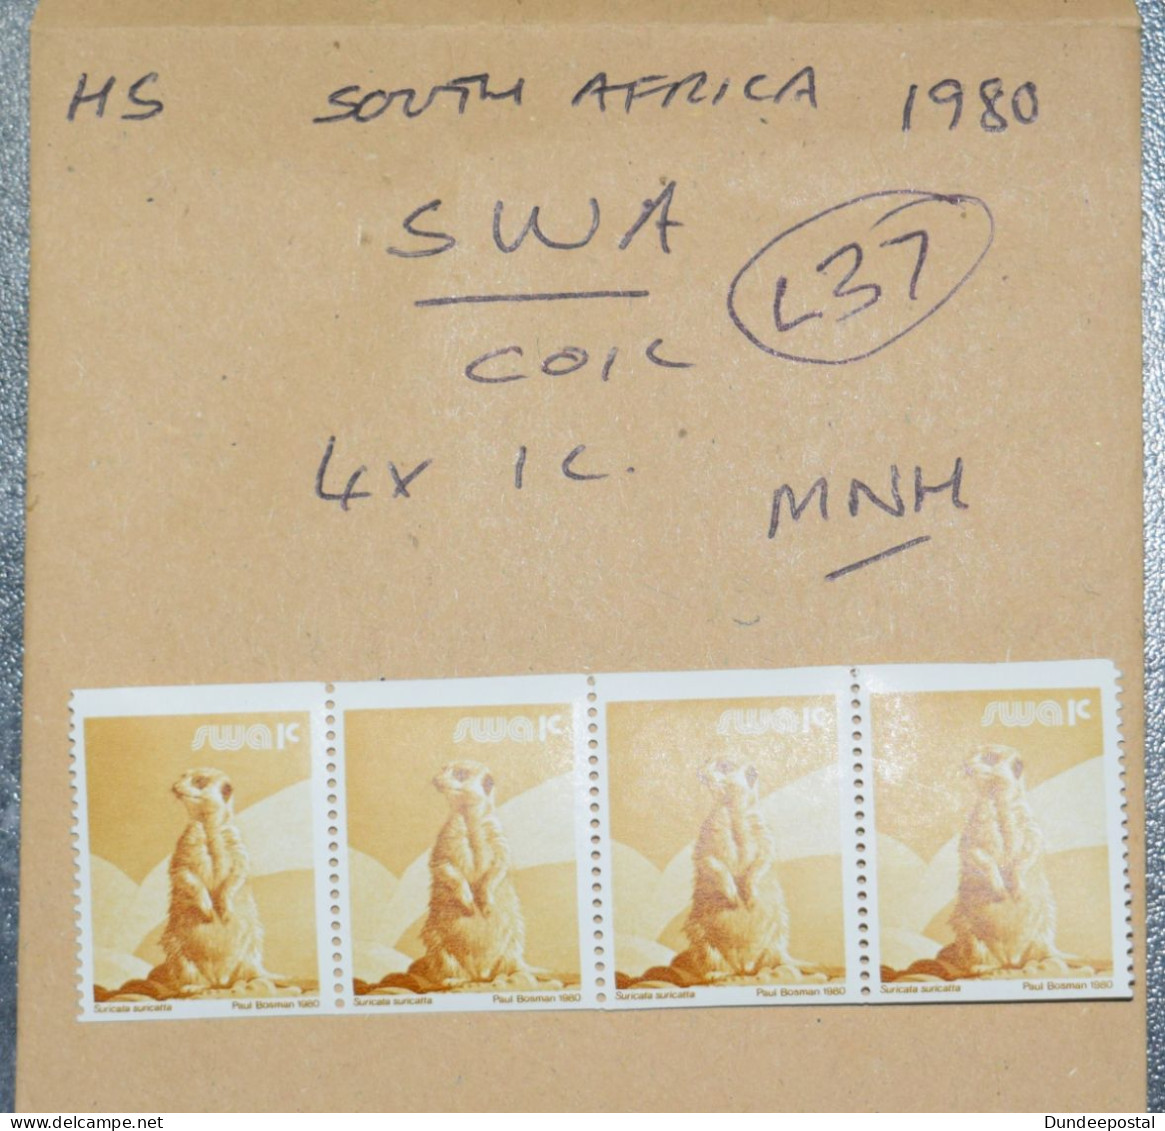 SOUTH AFRICA  STAMPS SWA Coil X 4 MNH  1980  L37  ~~L@@K~~ - Unused Stamps